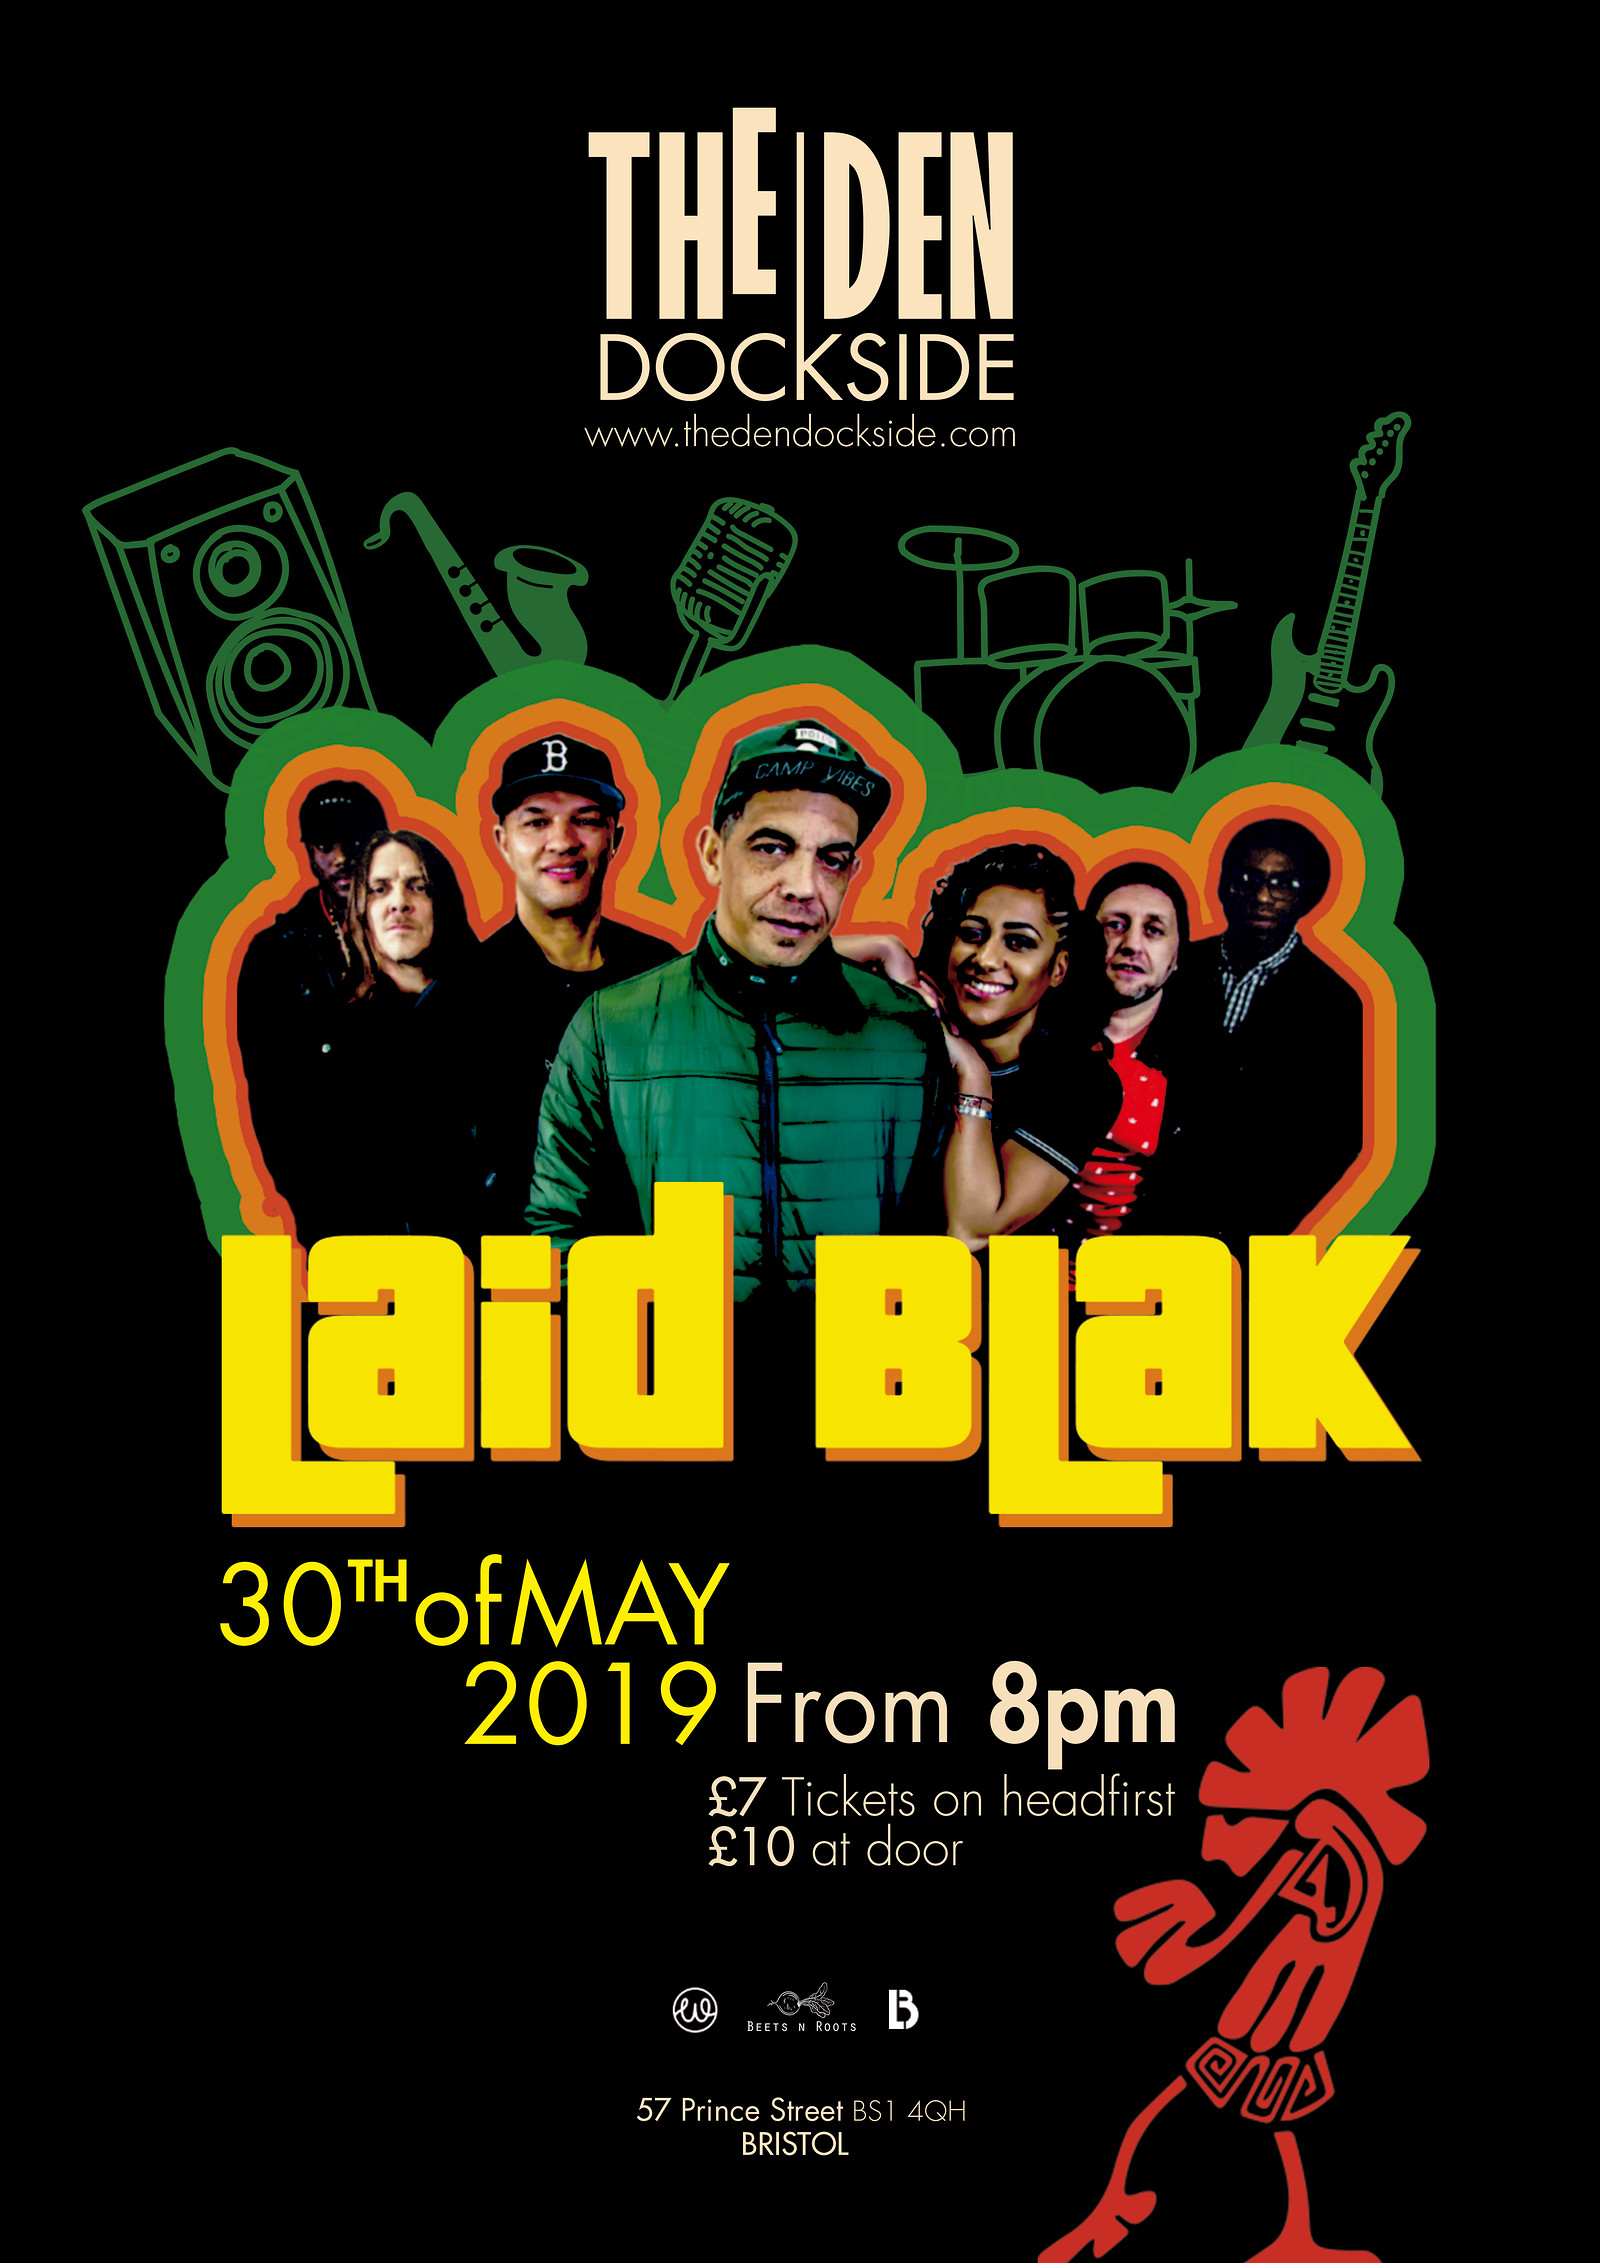 Laid Blak at The Den Launch Party at The Den dockside